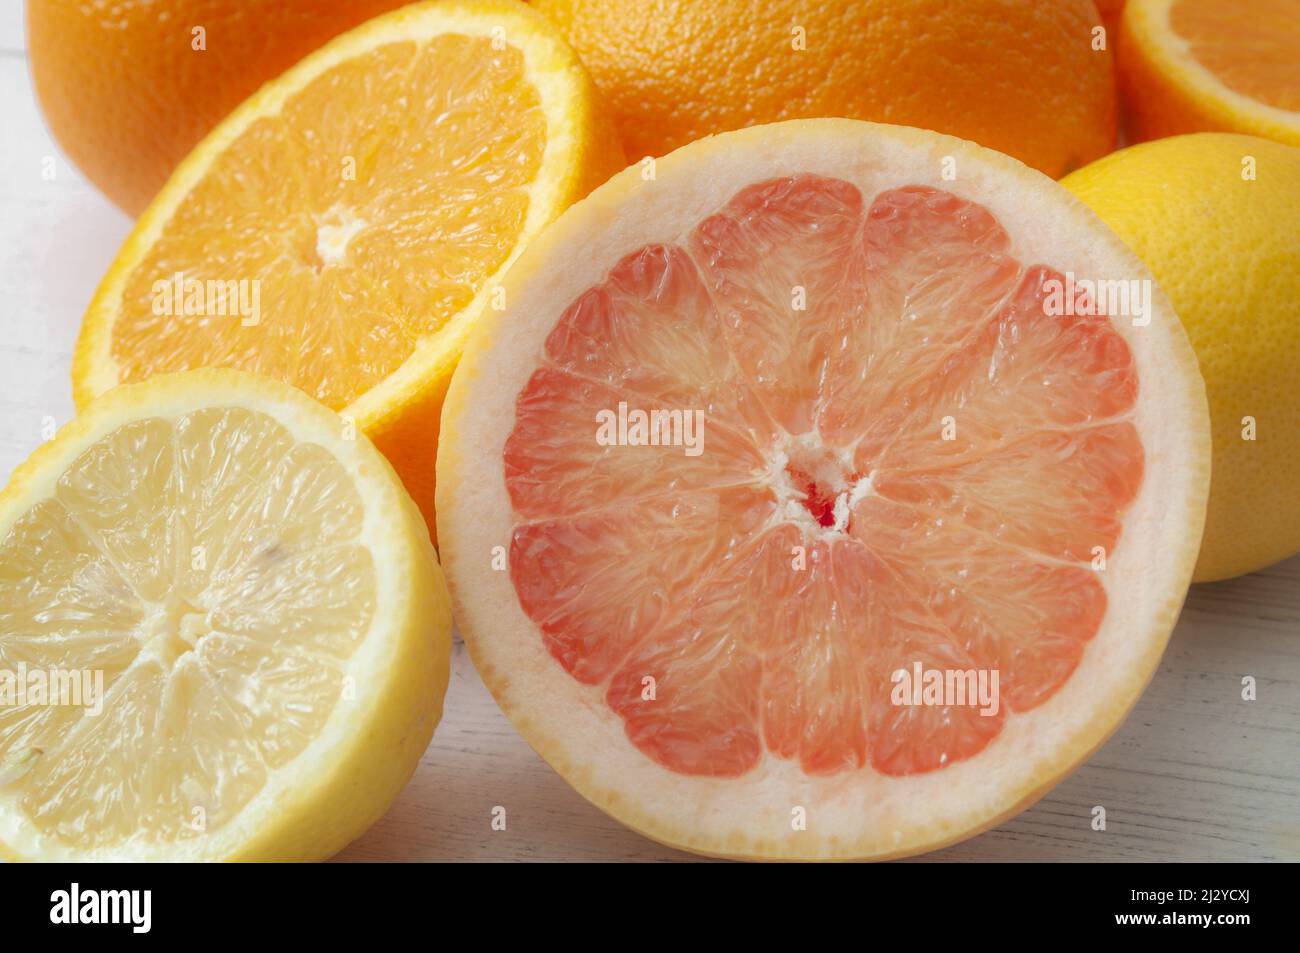 Fresh citrus fruits and food high in vitamin c concept theme with close up on a pile of mixed fruit with an orange, lemon and grapefruit sliced in hal Stock Photo